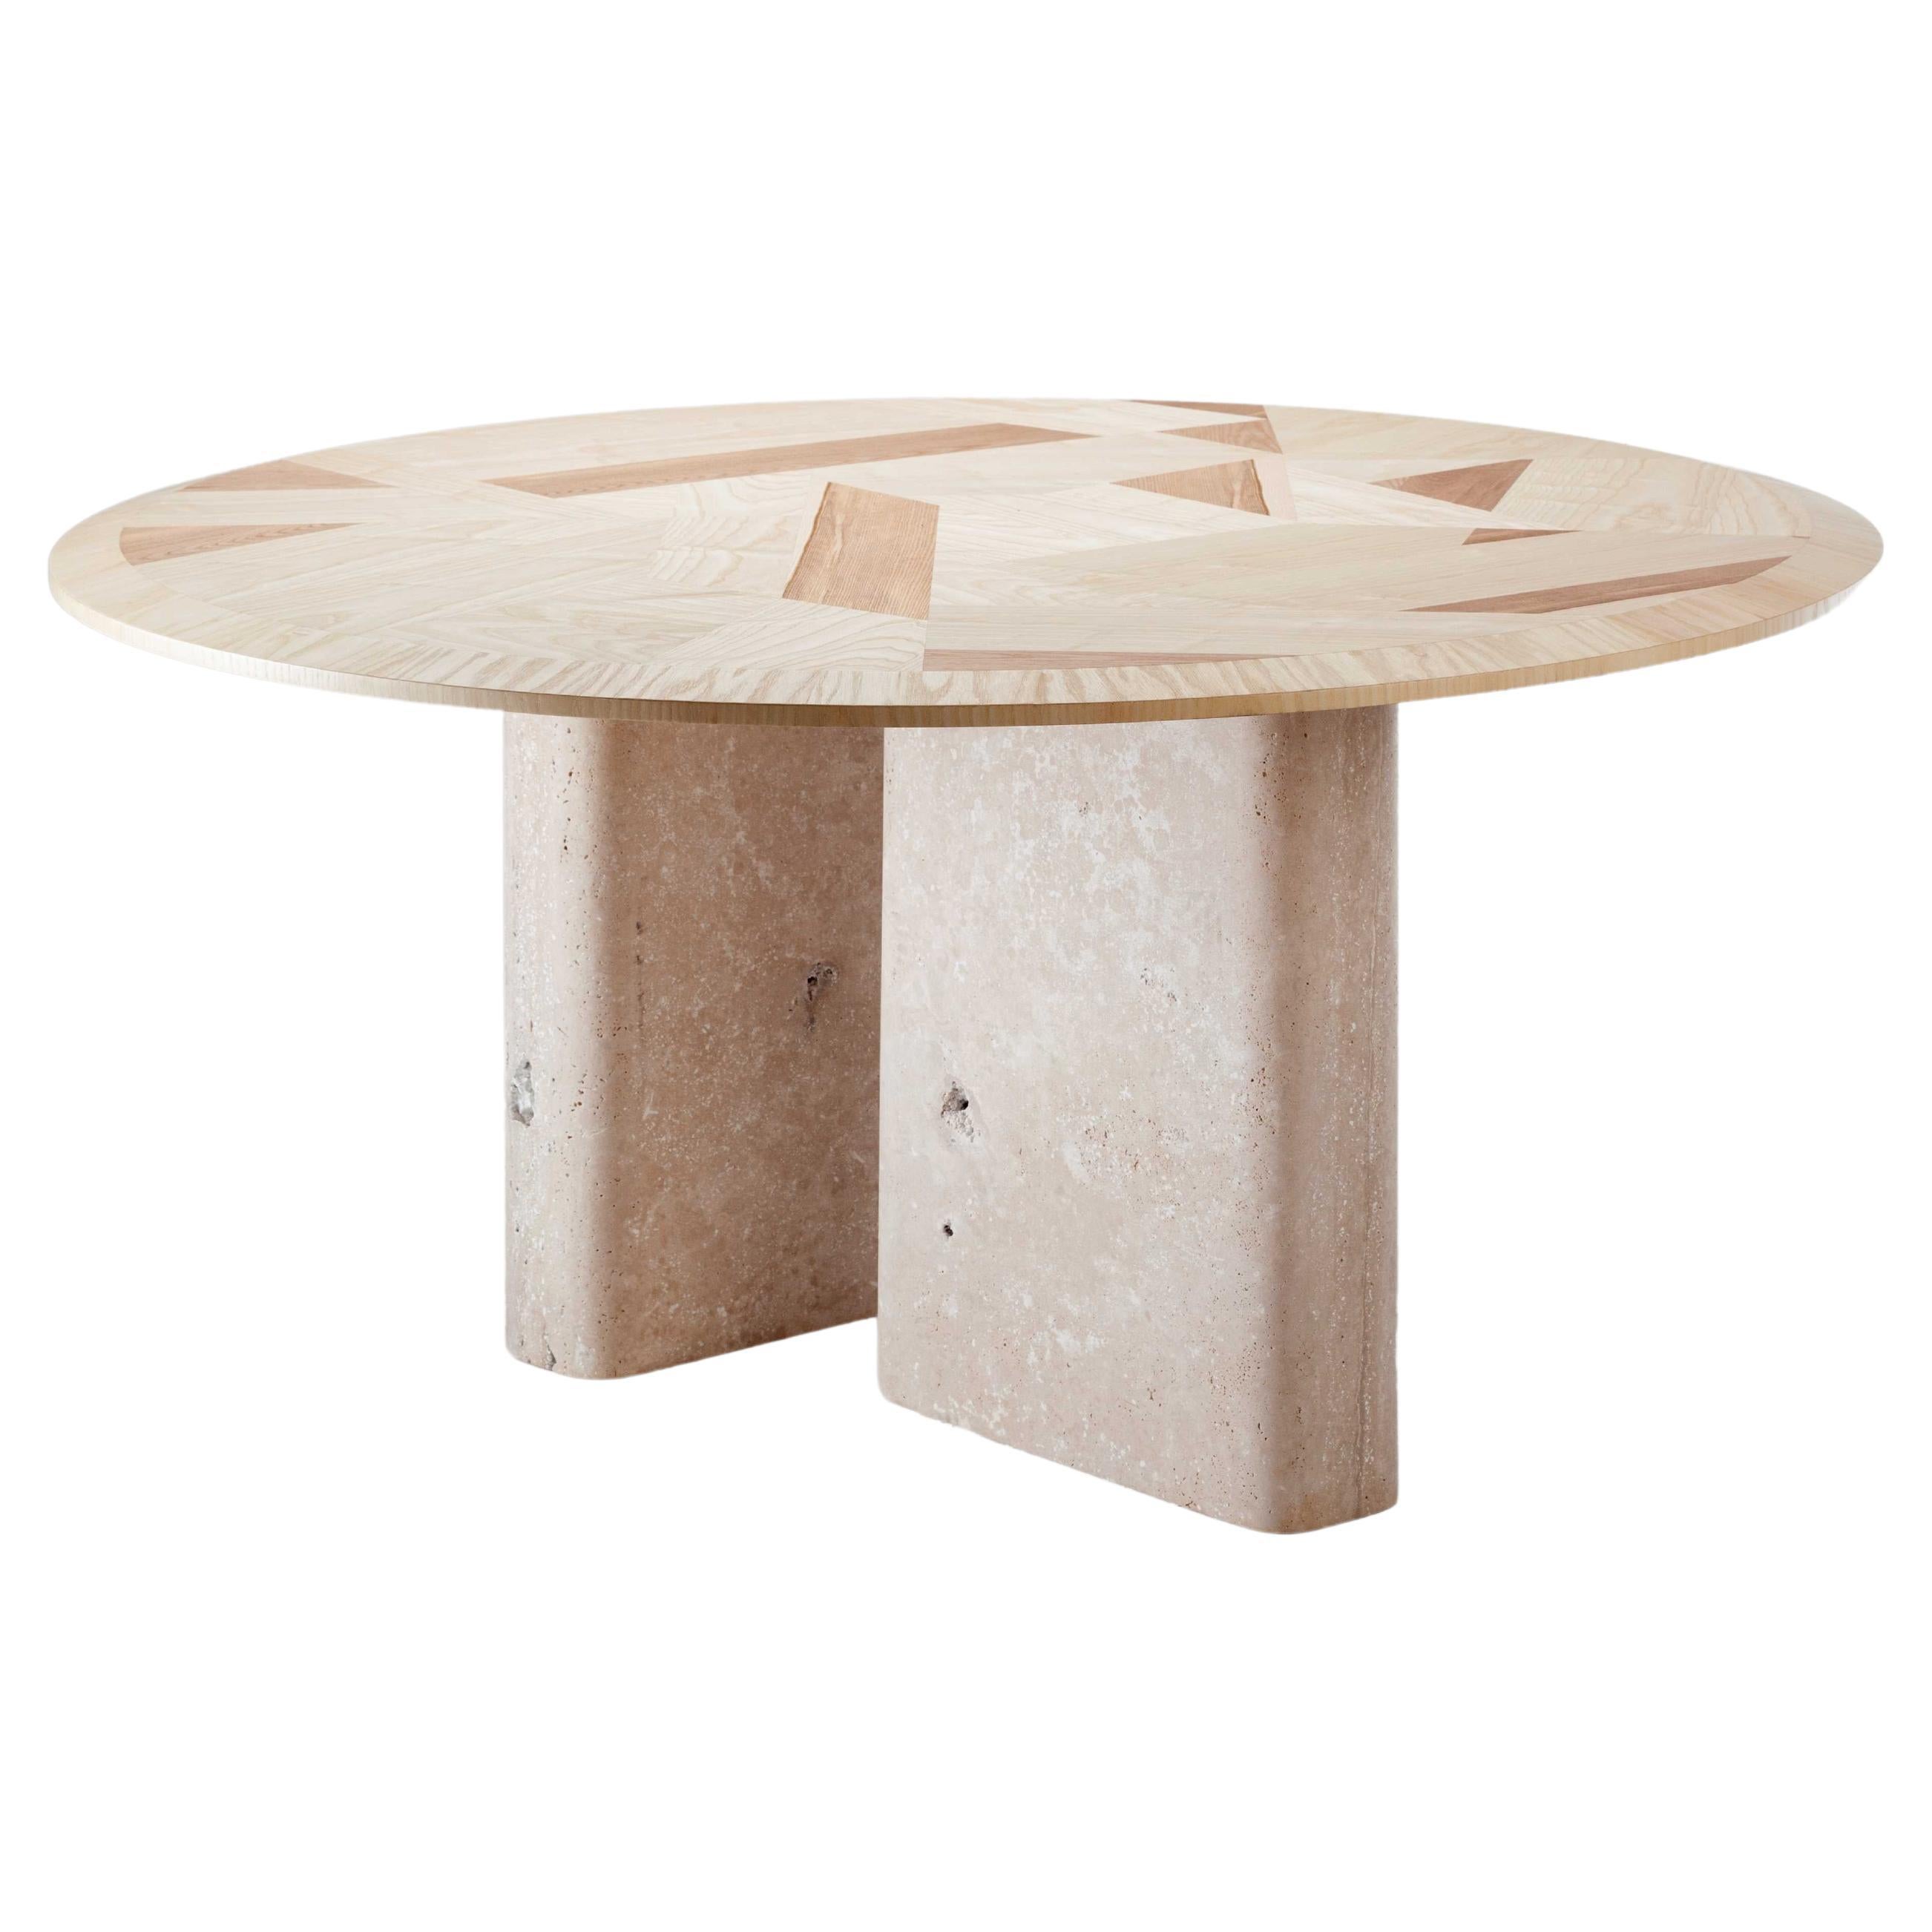 DOOQ Organic Modern Natural Olive Ash and Travertine Dining Table L'anamour, 150